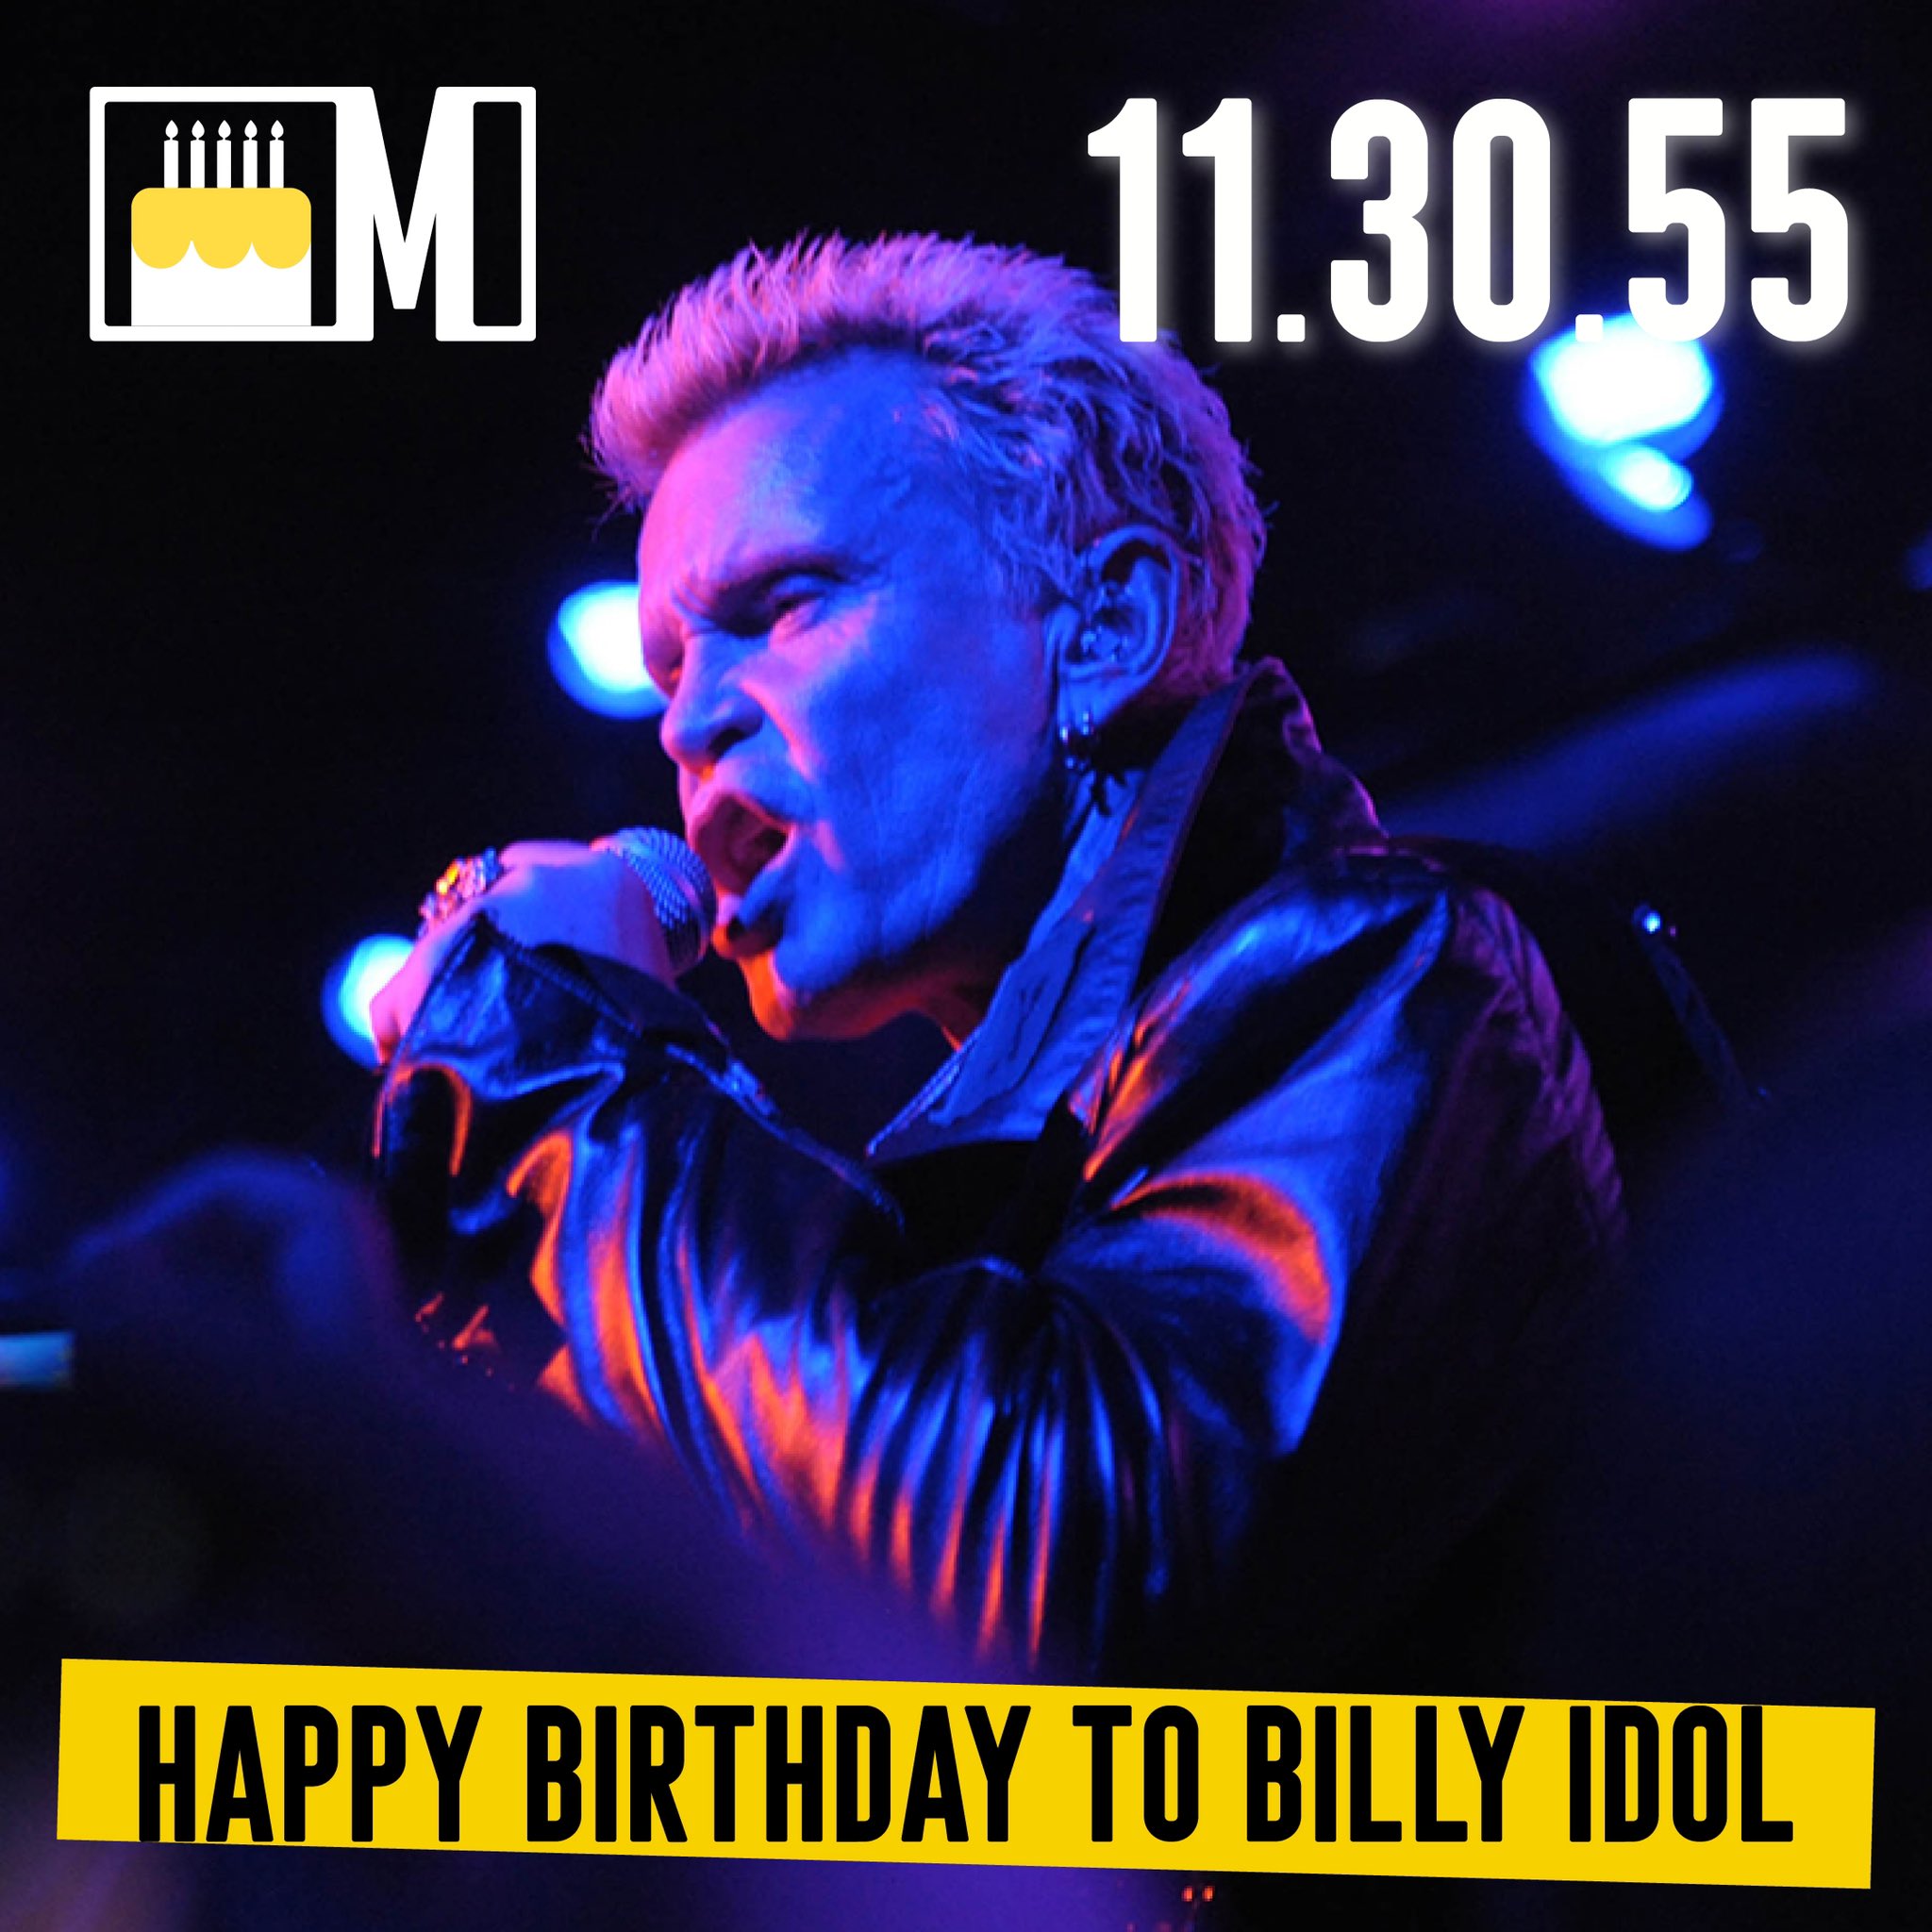 Happy Birthday to Billy Idol! Today we rock out and celebrate his 66th birthday 